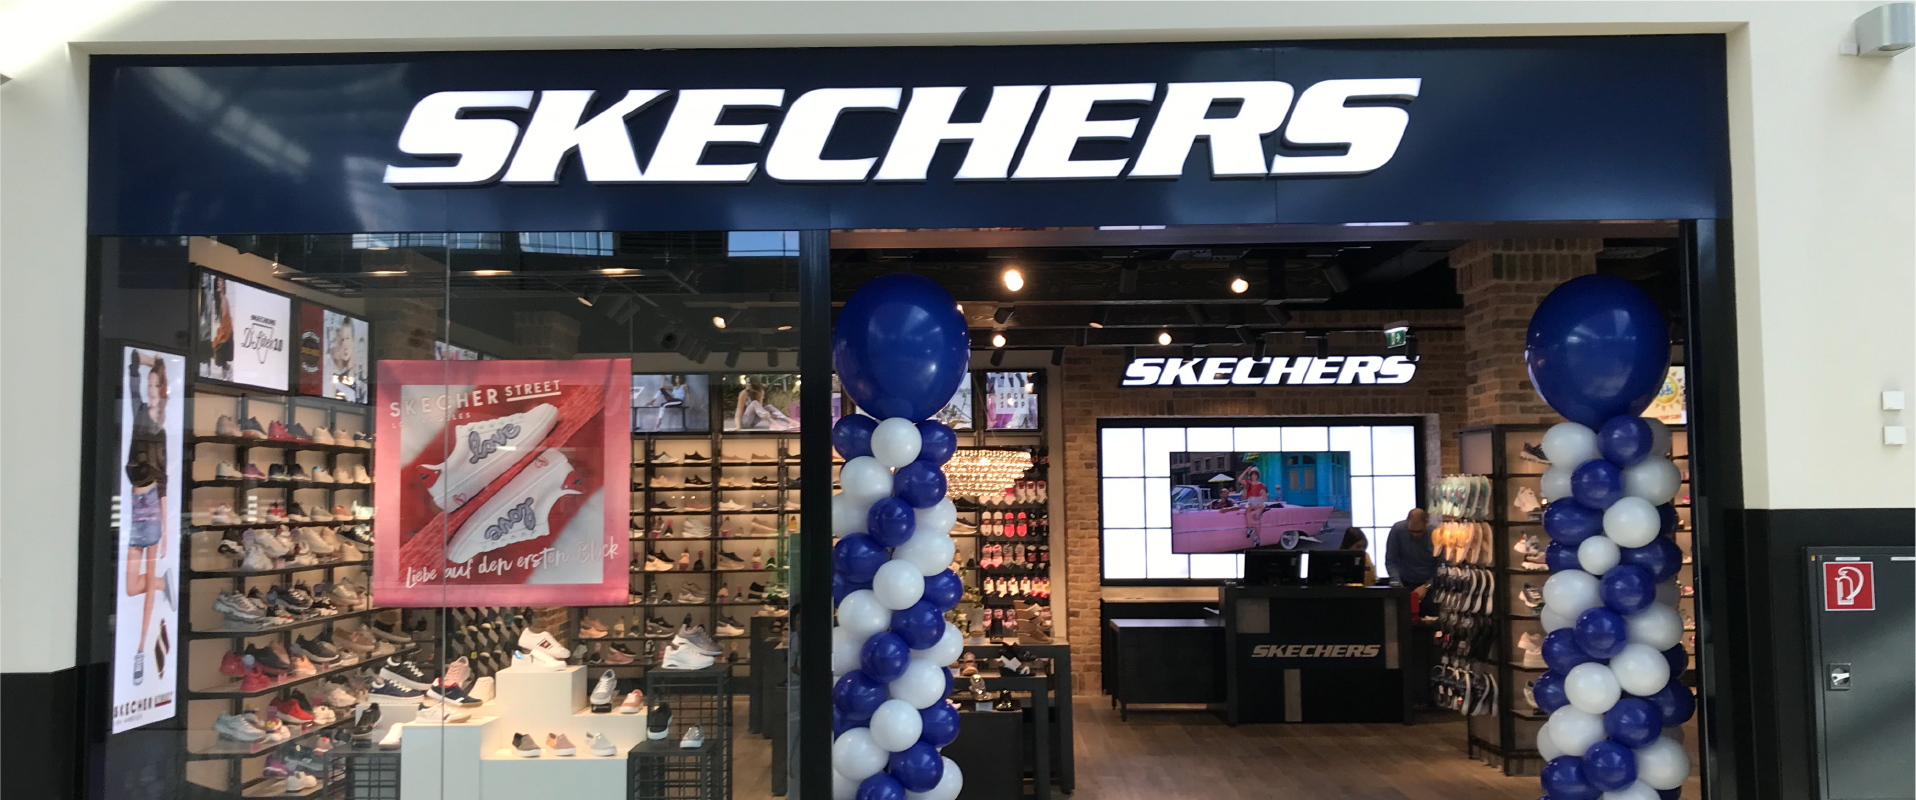 Astra Signs Case Study Skechers